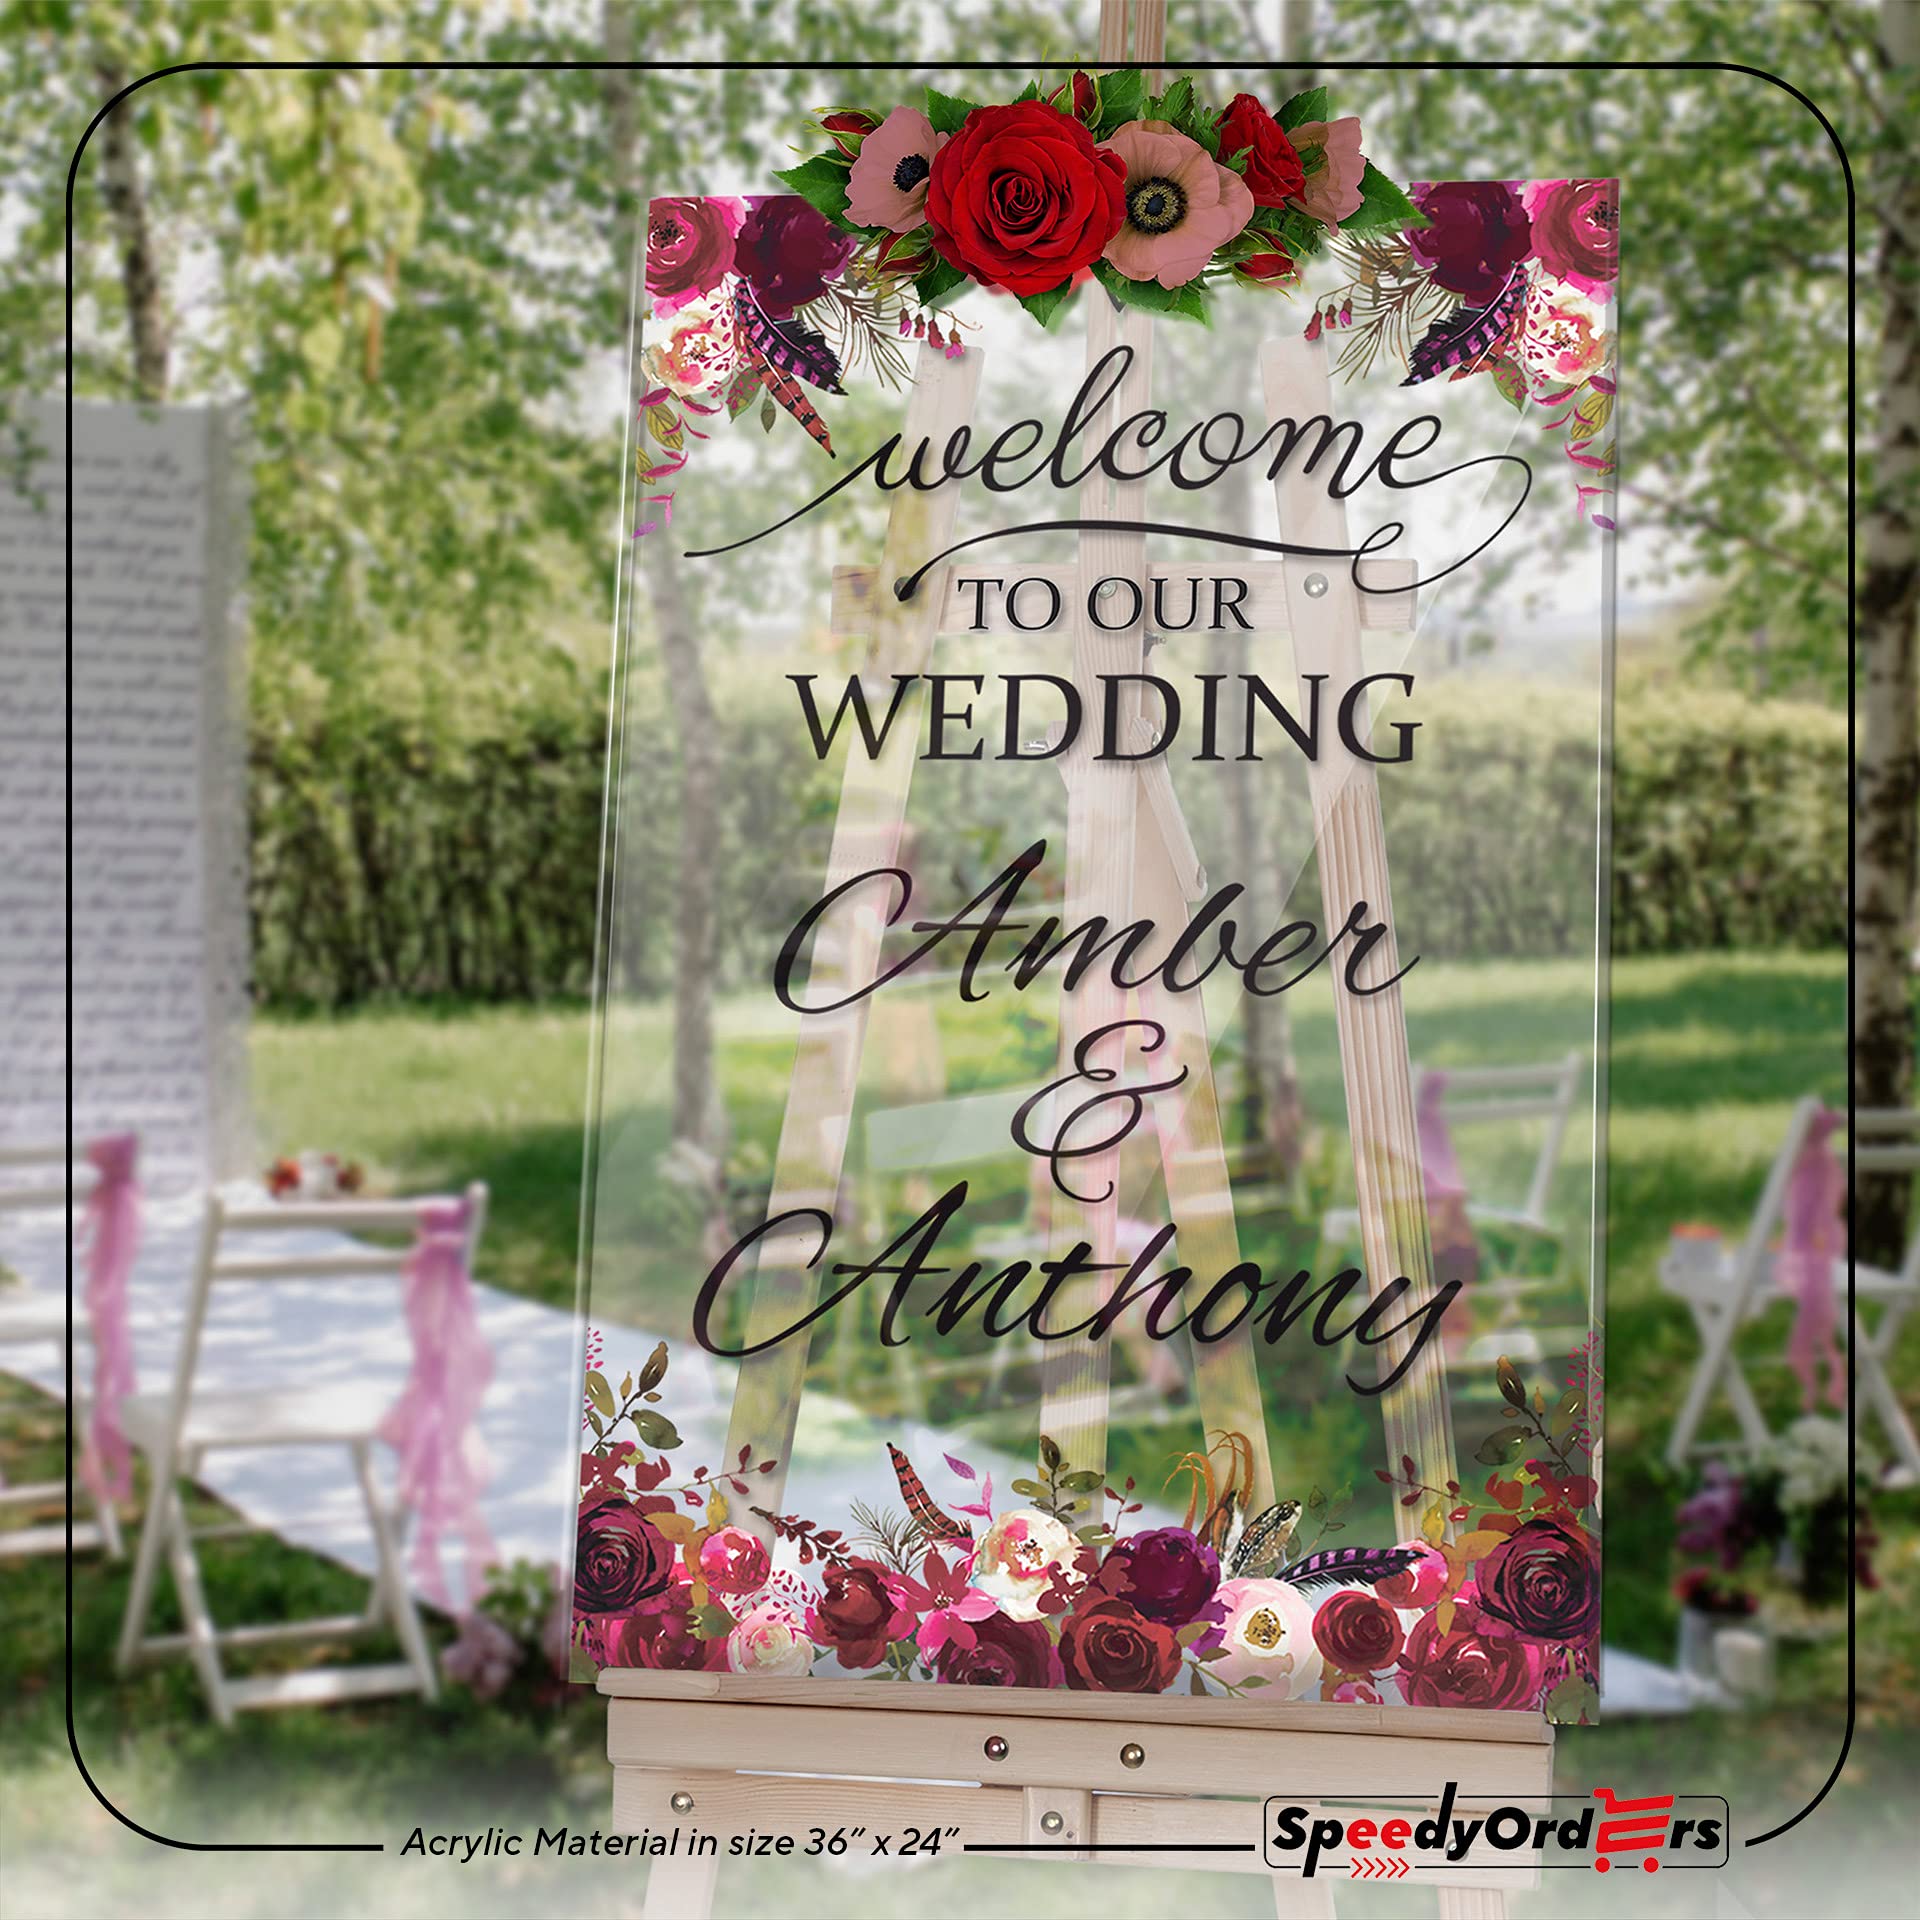 Roses Themed Wedding Sign - Wedding Welcome Sign - Wedding Reception Poster - Wedding Signs For Ceremony